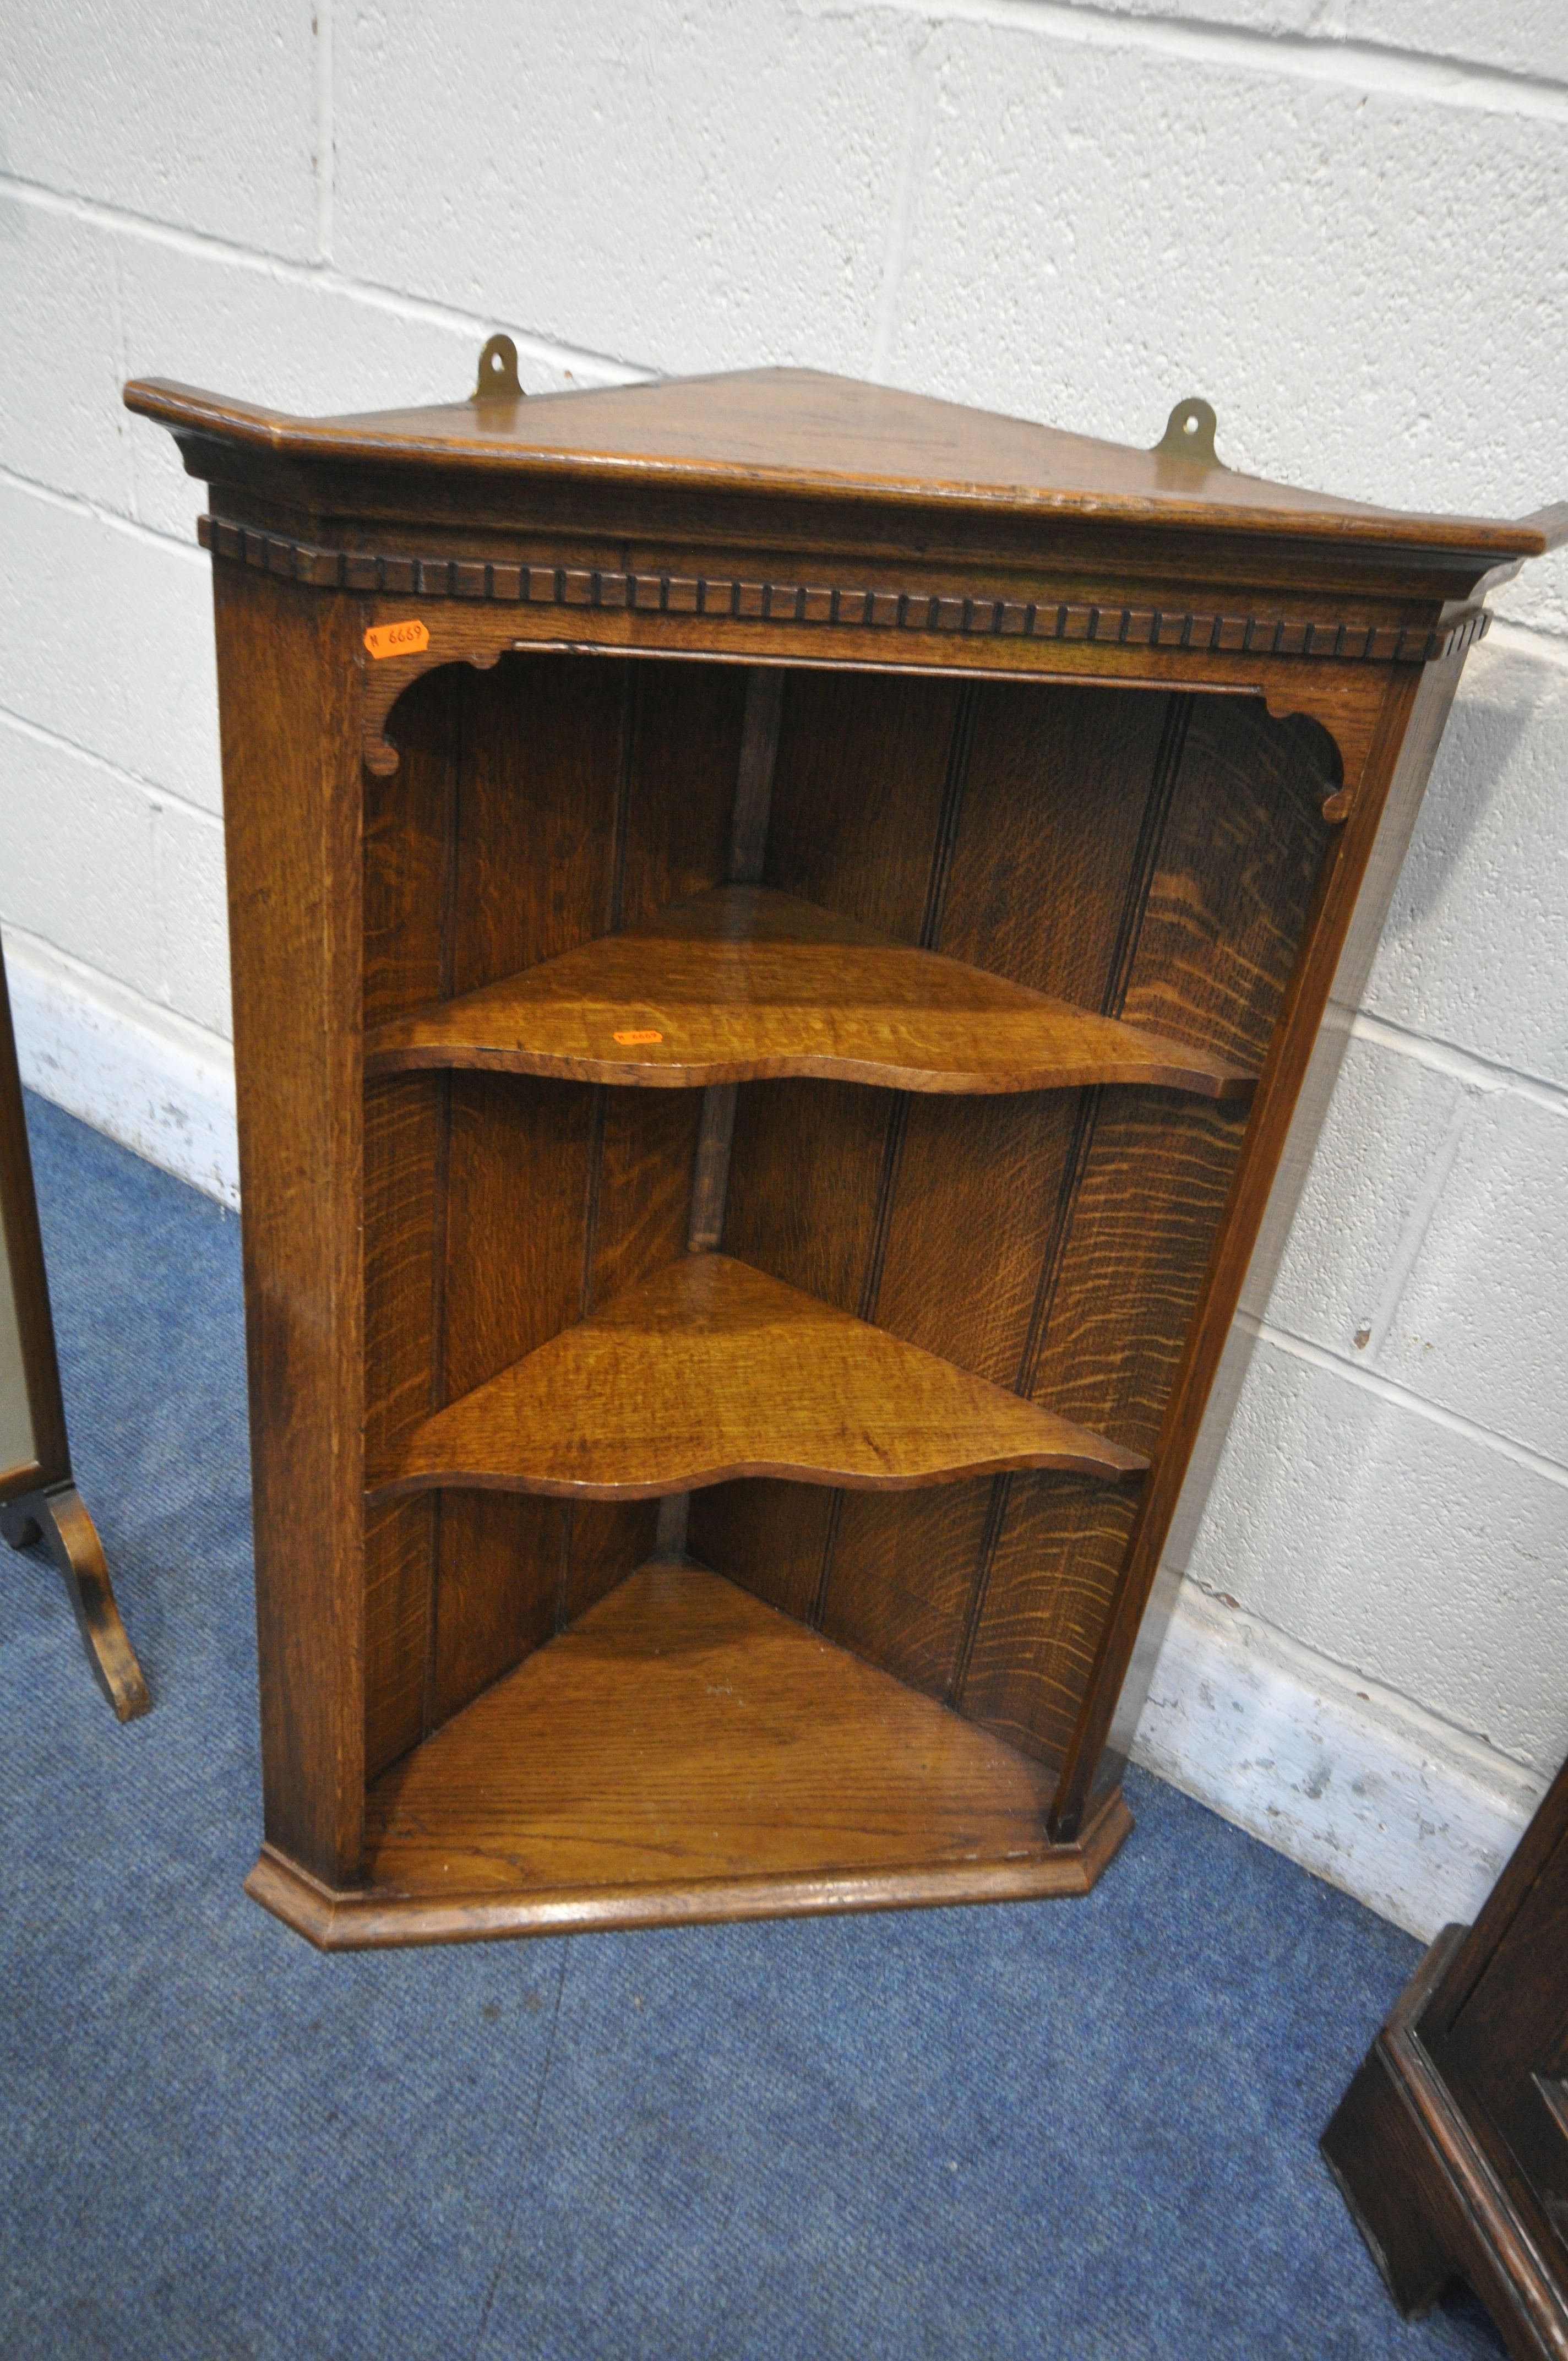 IN THE MANNER OF TITCHMARSH AND GOODWIN, A SOLID OAK CORNER CUPBOARD, with a glazed door, above a - Image 3 of 4